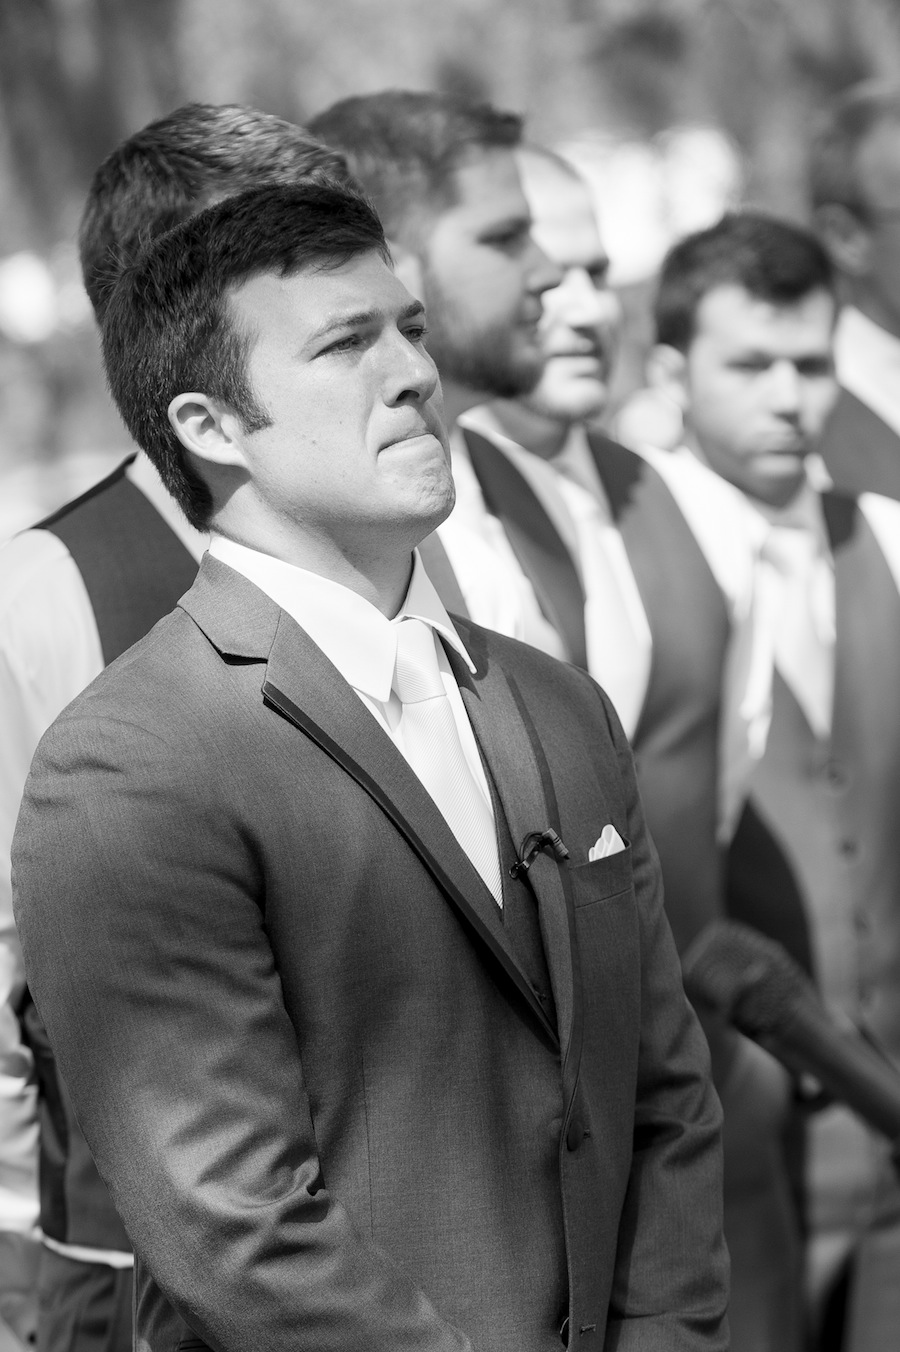 Groom Watching Bride Walking Down Aisle during Wedding Ceremony | Marc Edwards Photographs